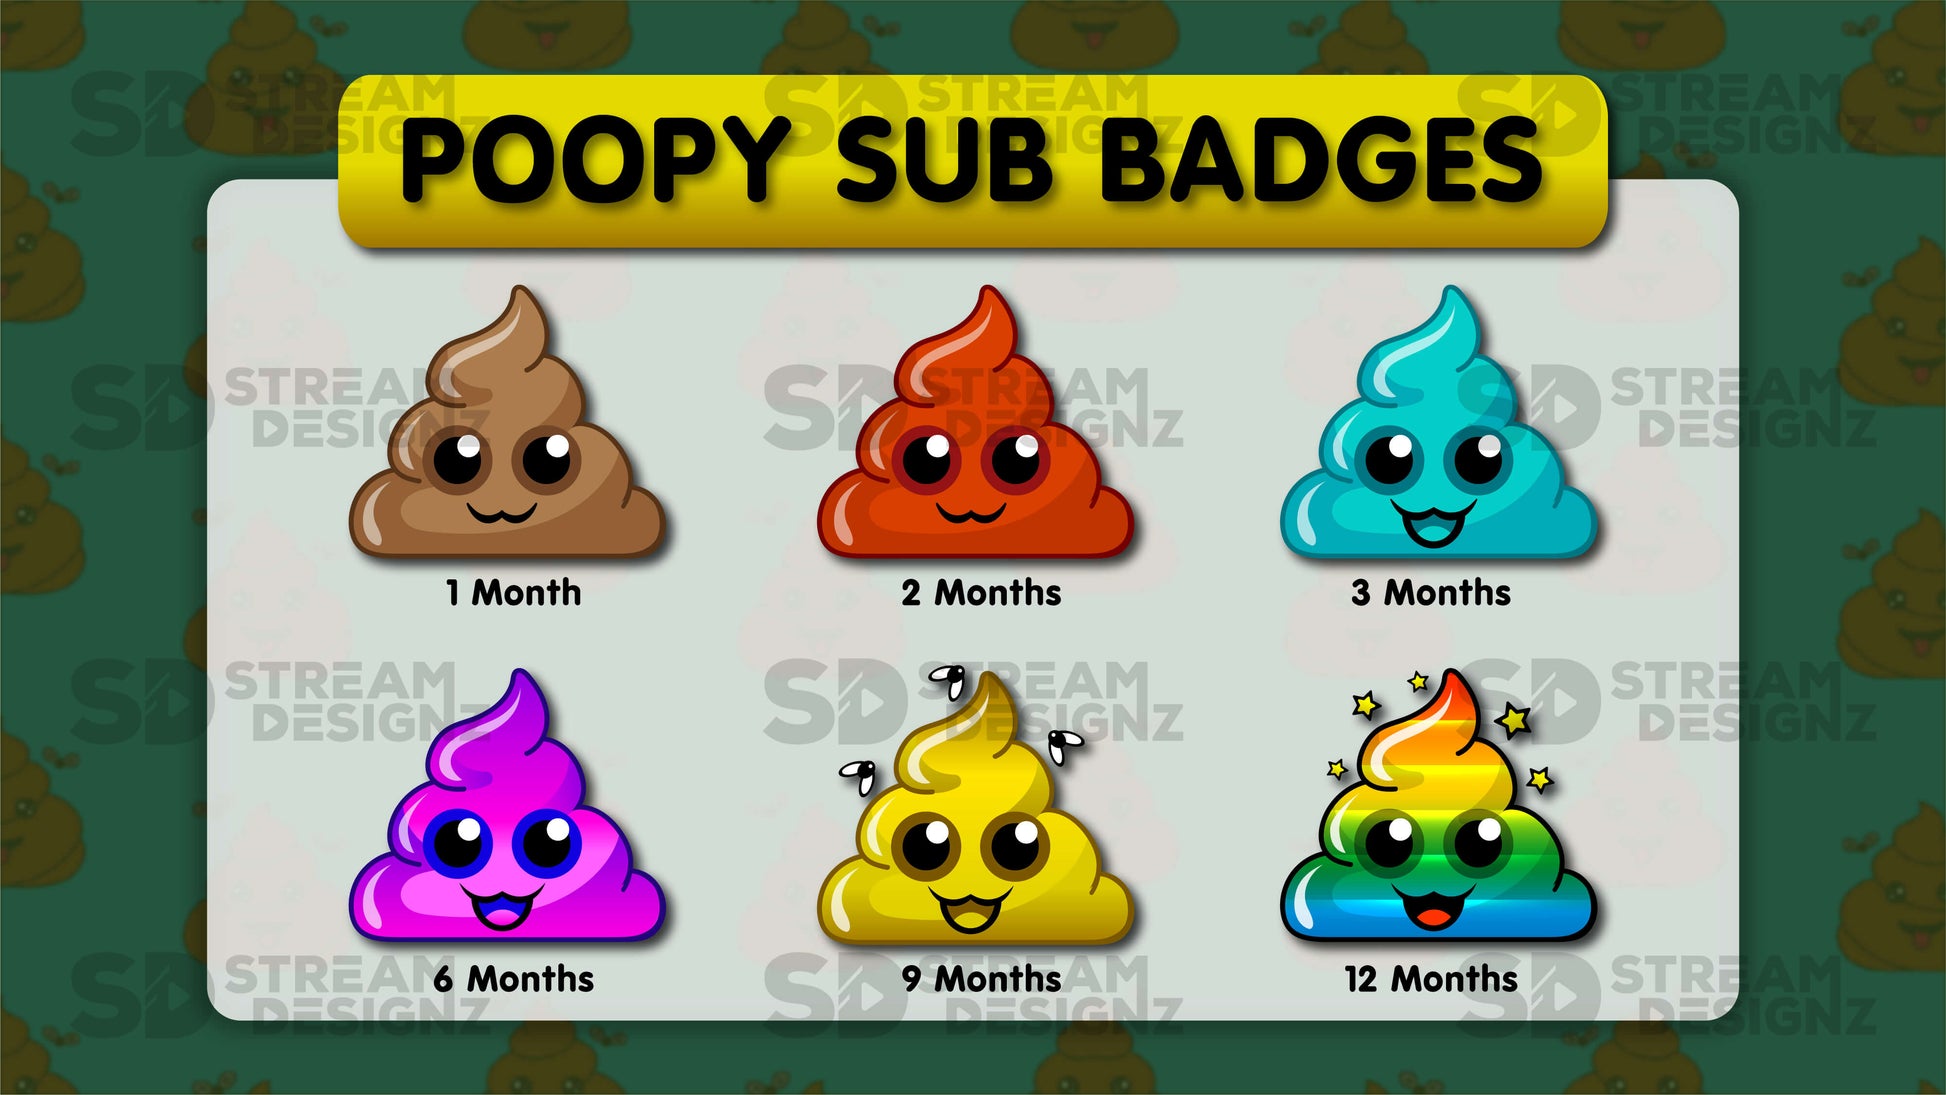 6 pack sub badges preview image poopy stream designz